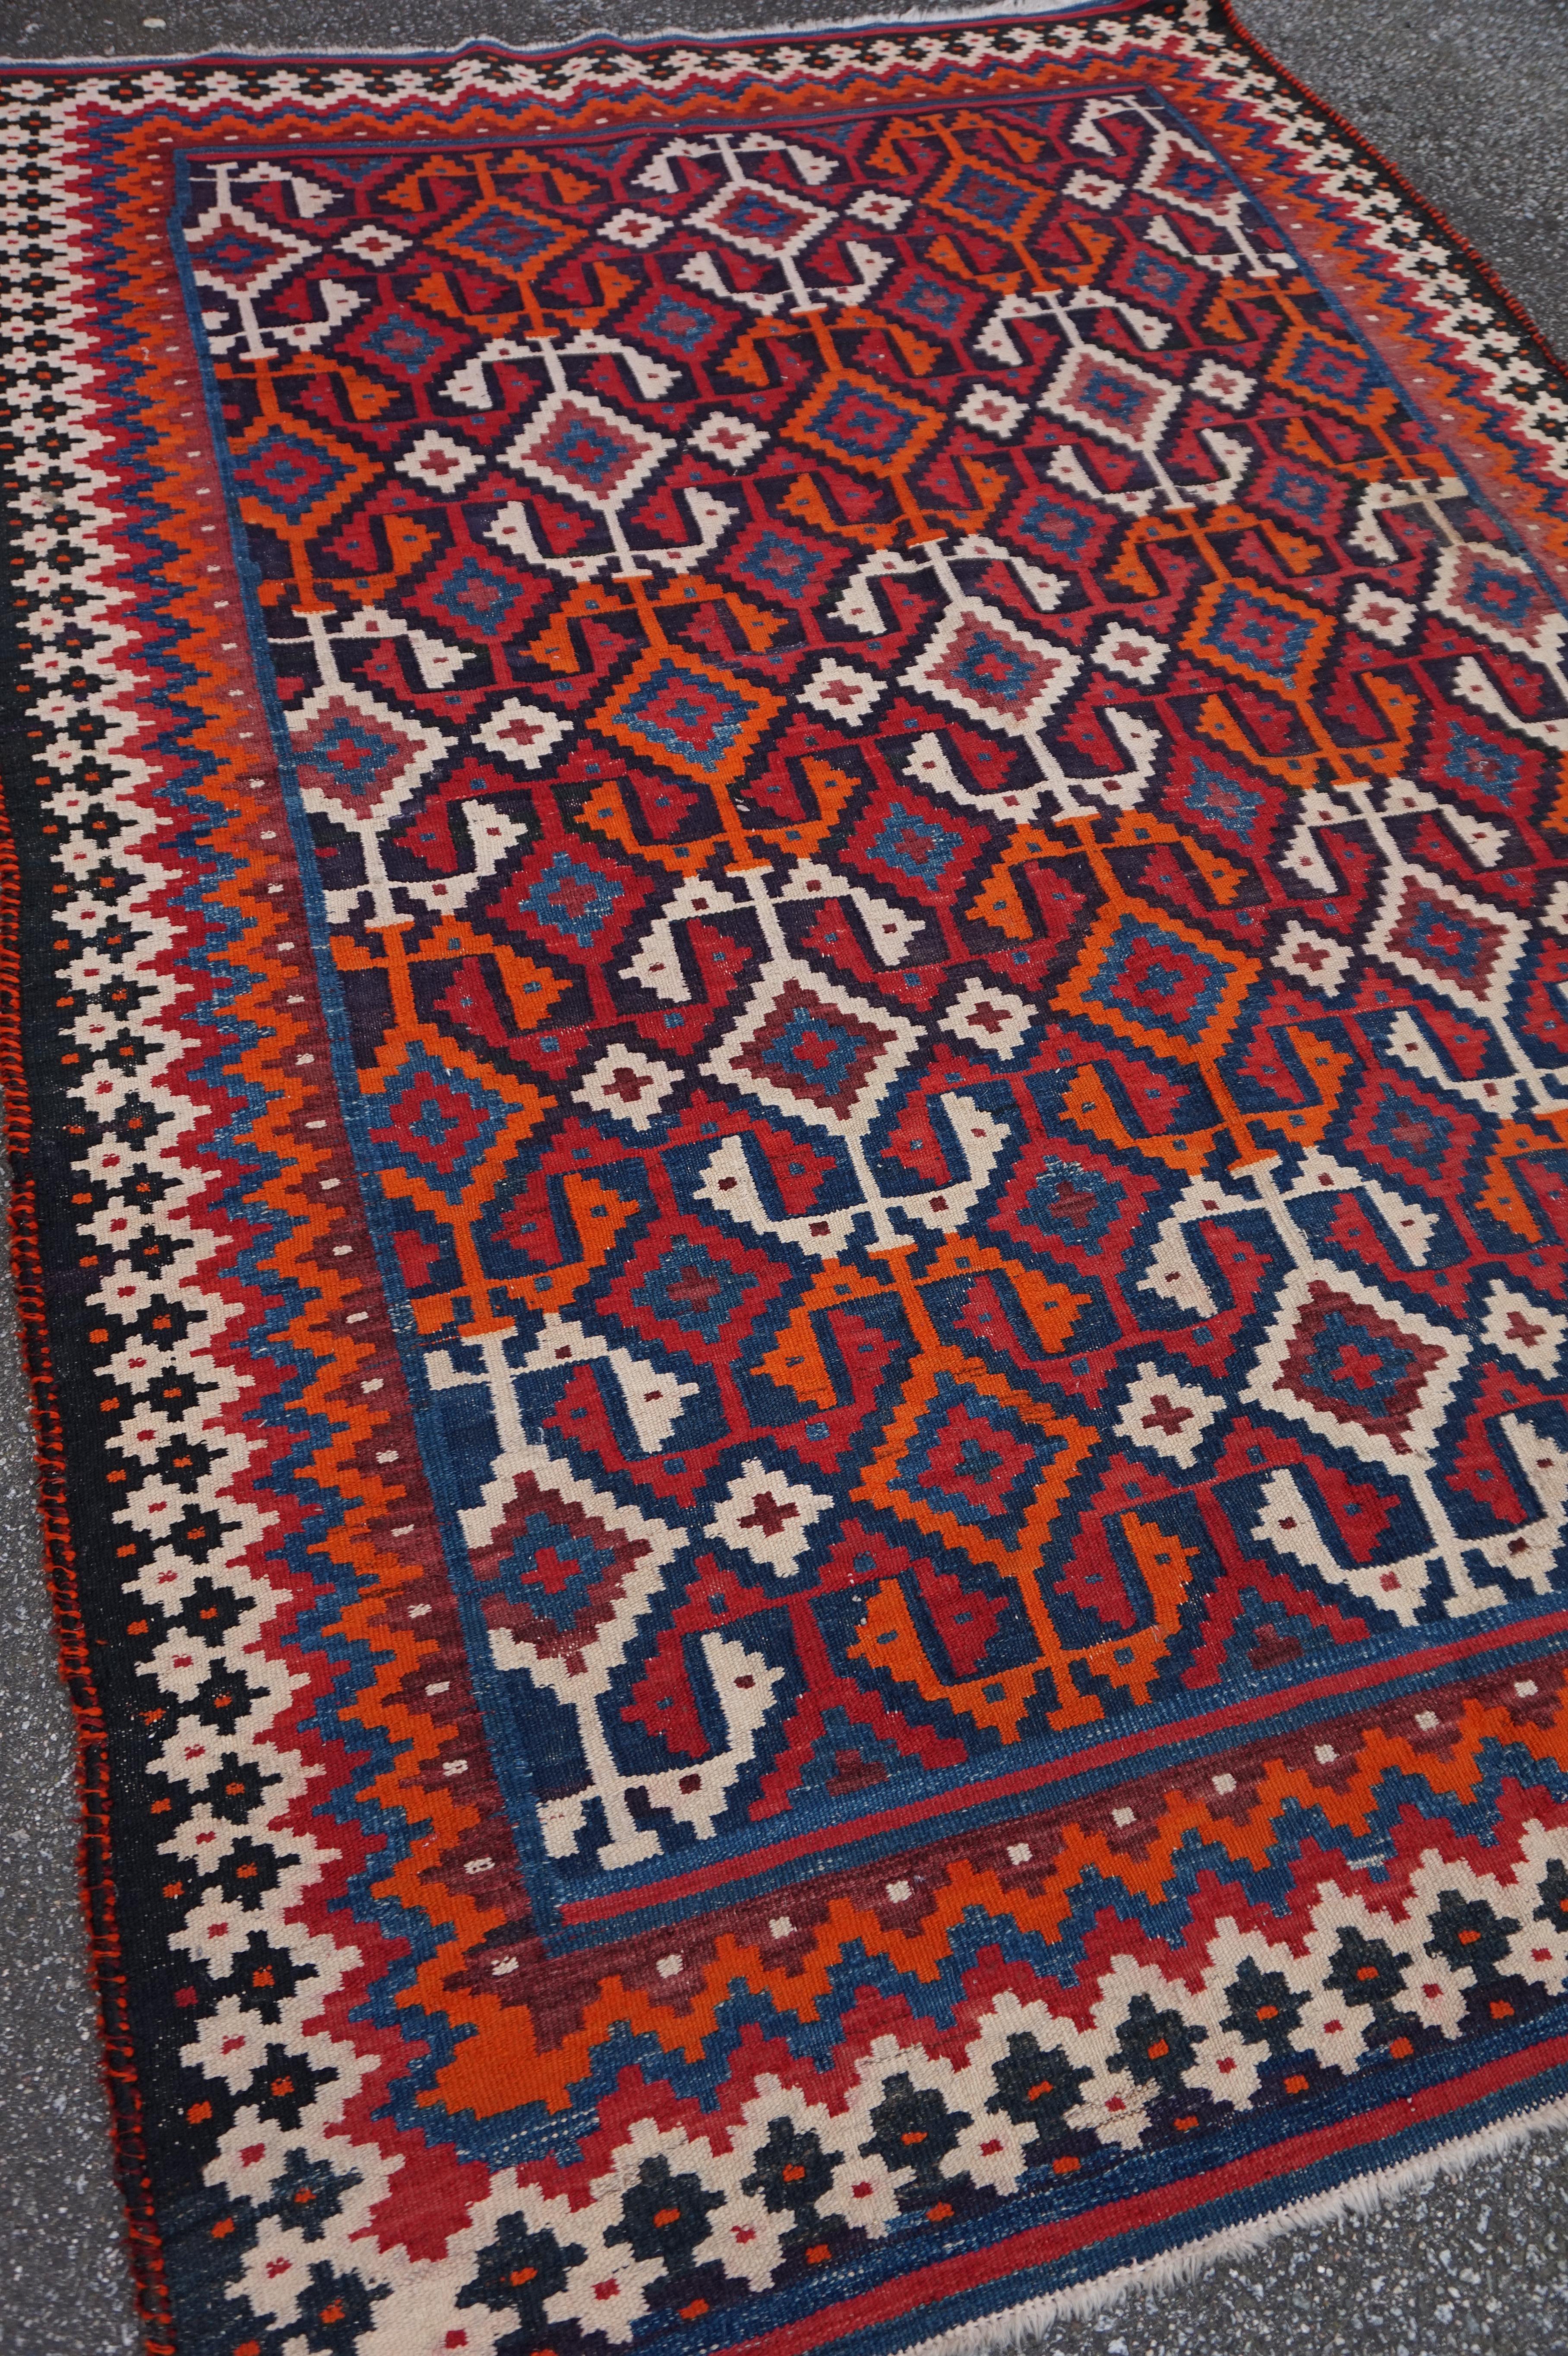 Fine Semi-Antique Anatolian Flat-weave Geometric Tribal Wool Kilim In Good Condition For Sale In Vancouver, British Columbia